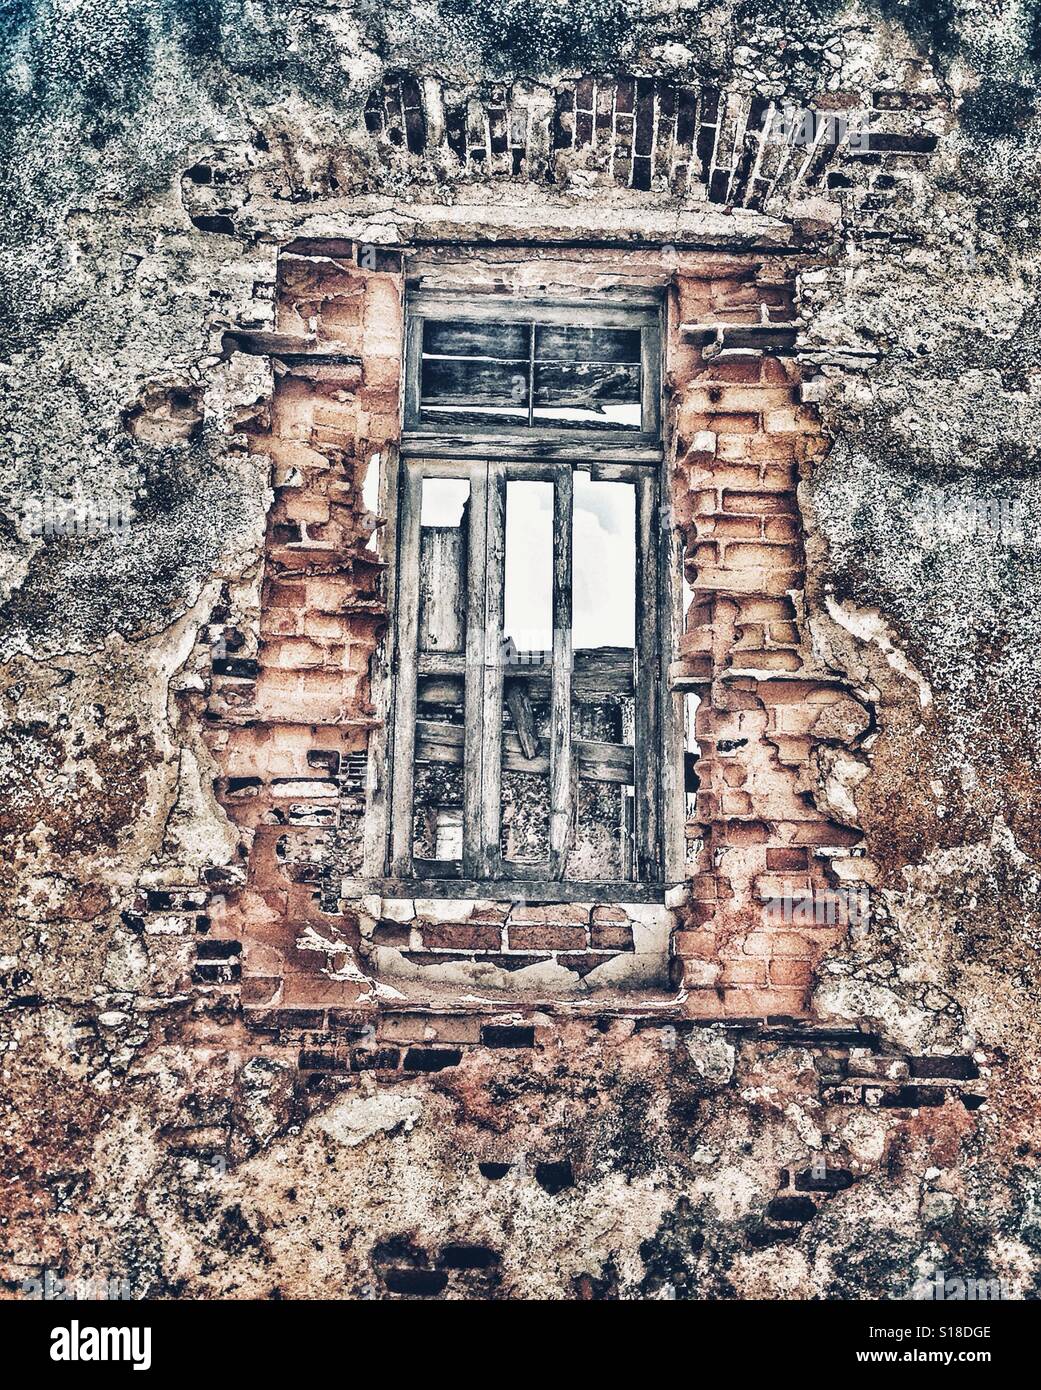 Old wooden window frame in derelict building Stock Photo